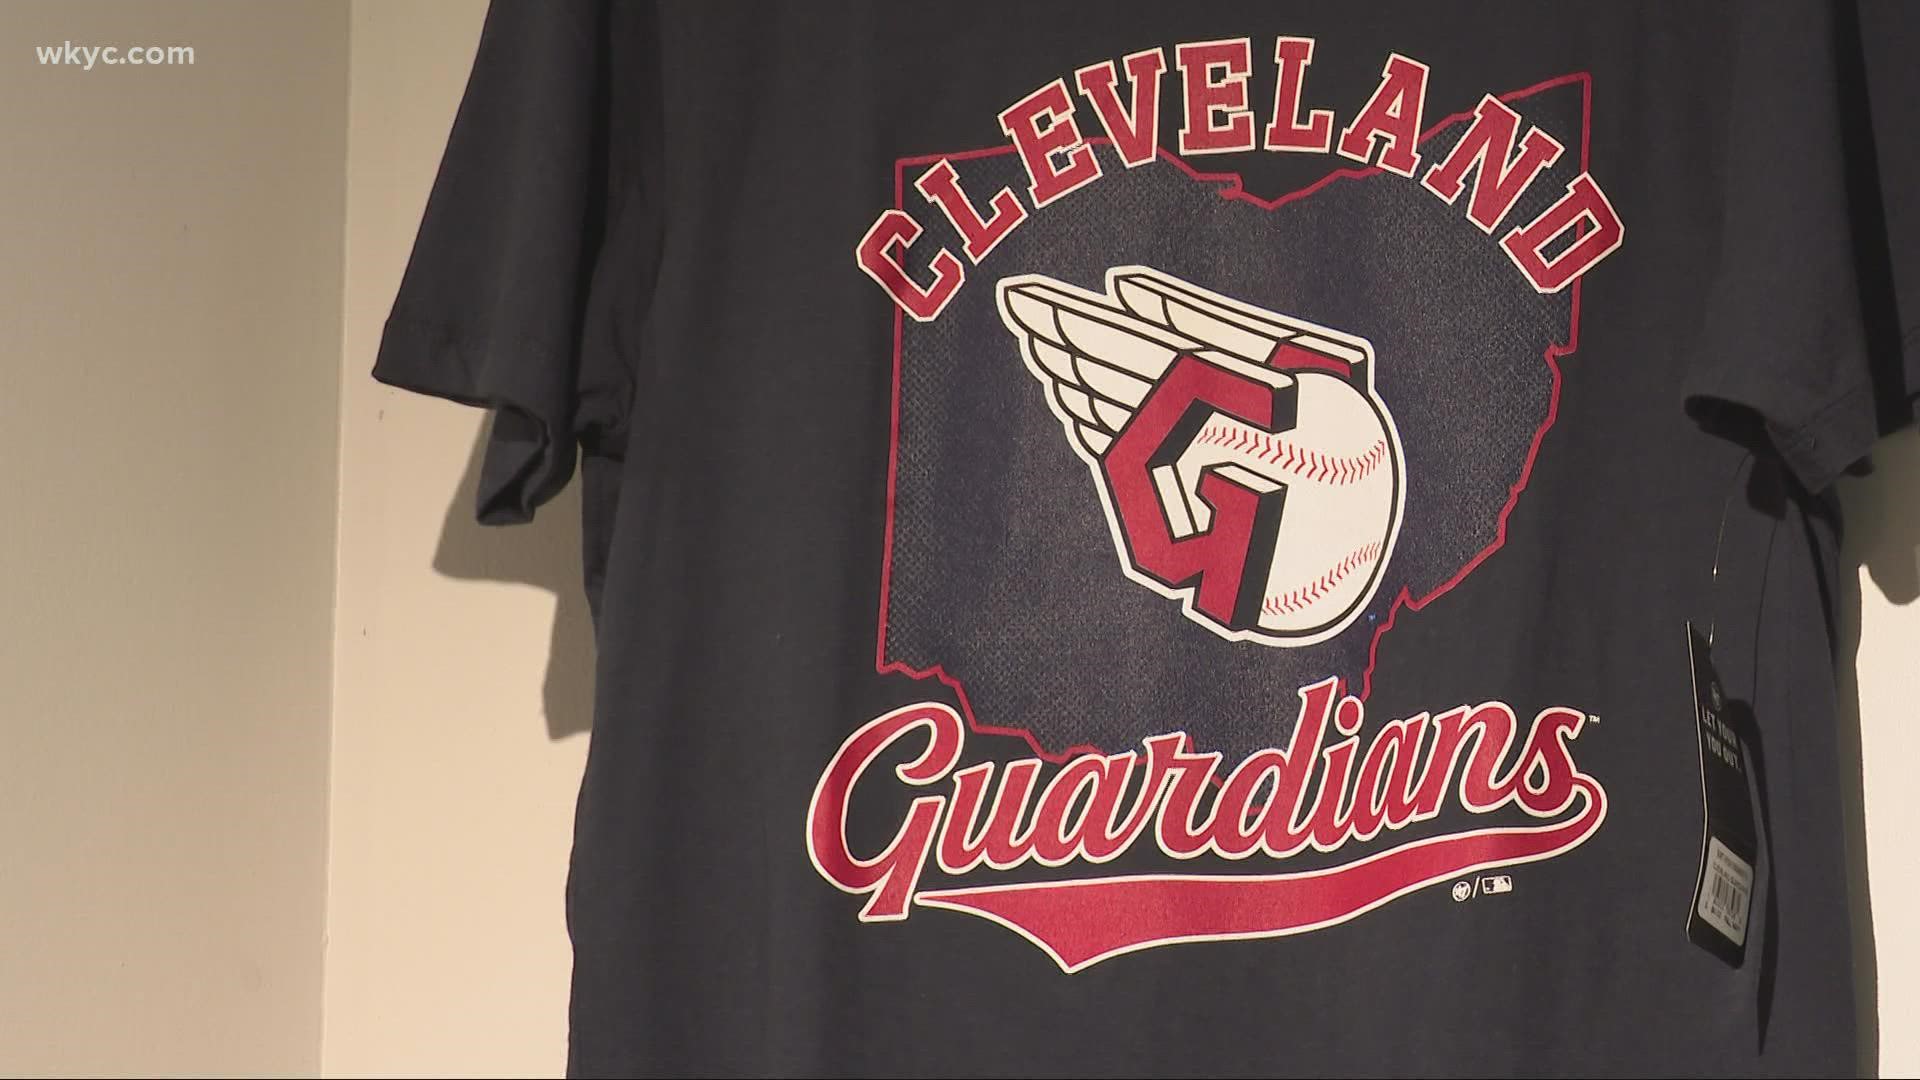 It's official: The Cleveland Guardians are here.